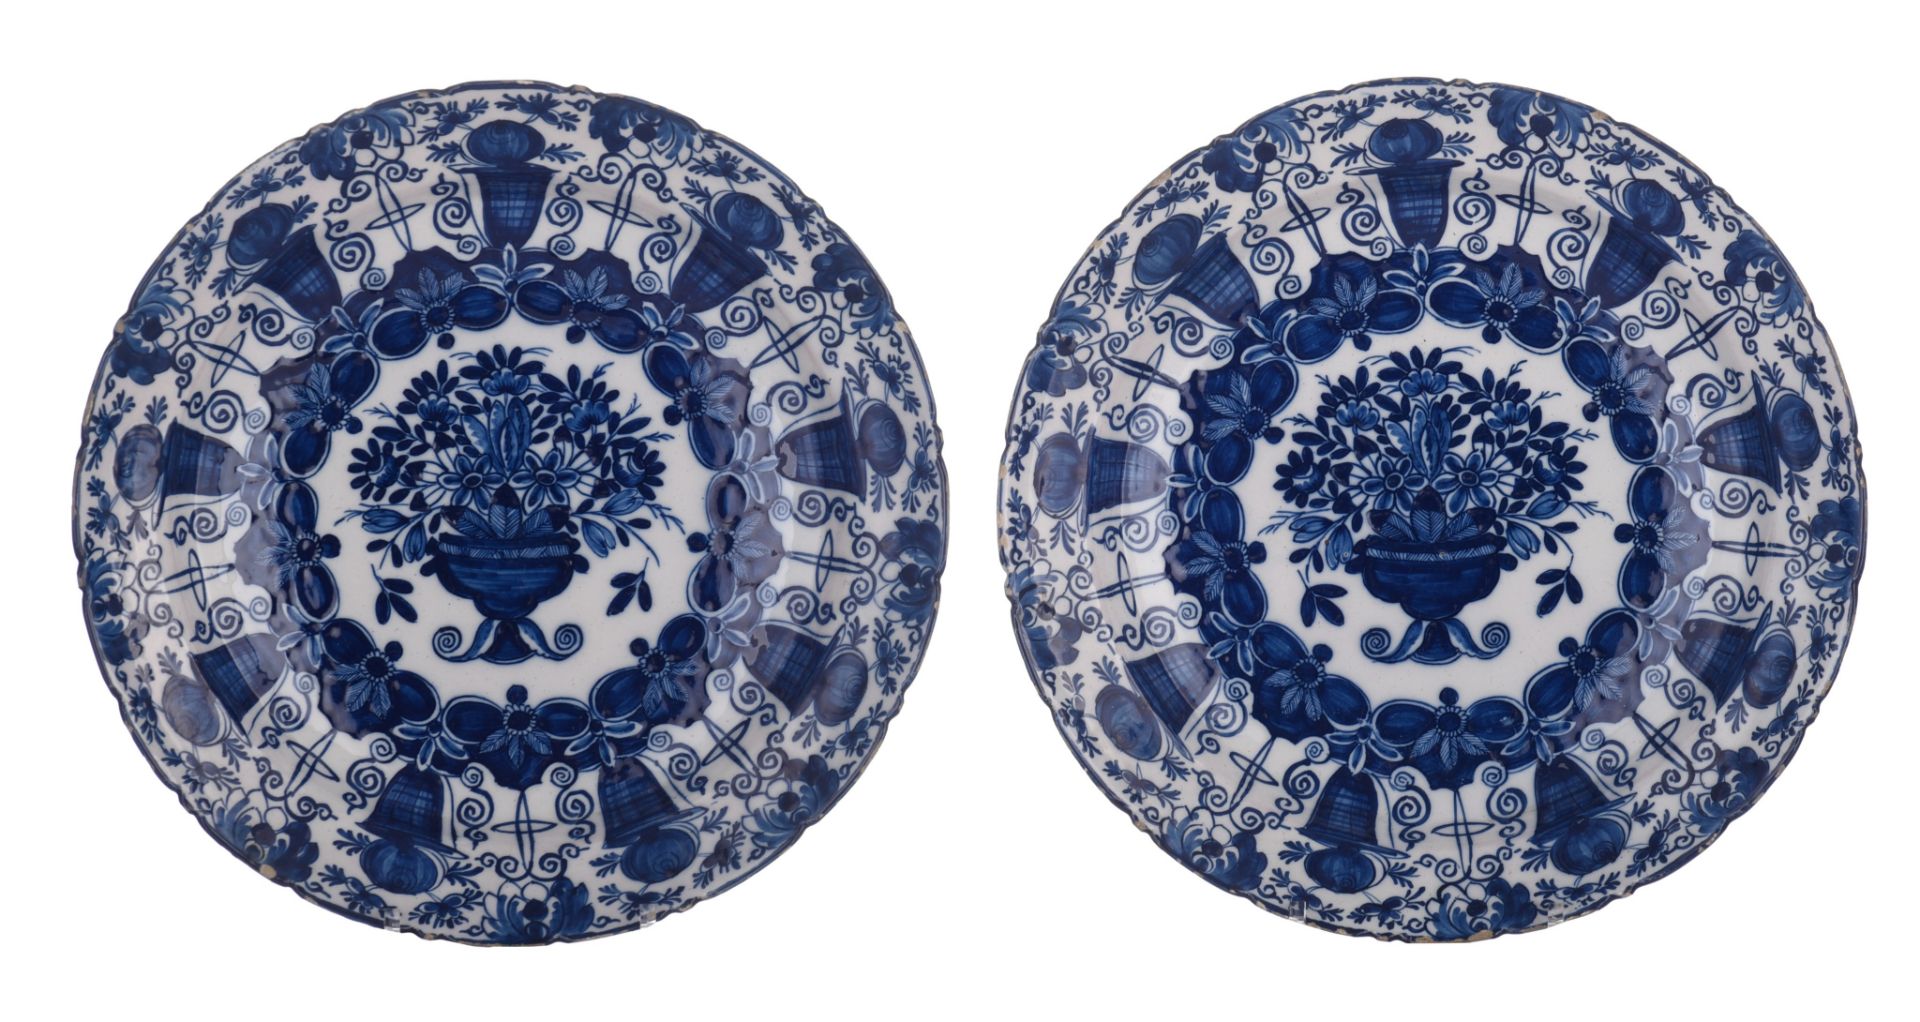 A collection of six Delft blue and white flower basket chargers, marked 'De Klauw', 18thC, ¯ 35 cm - Image 6 of 10